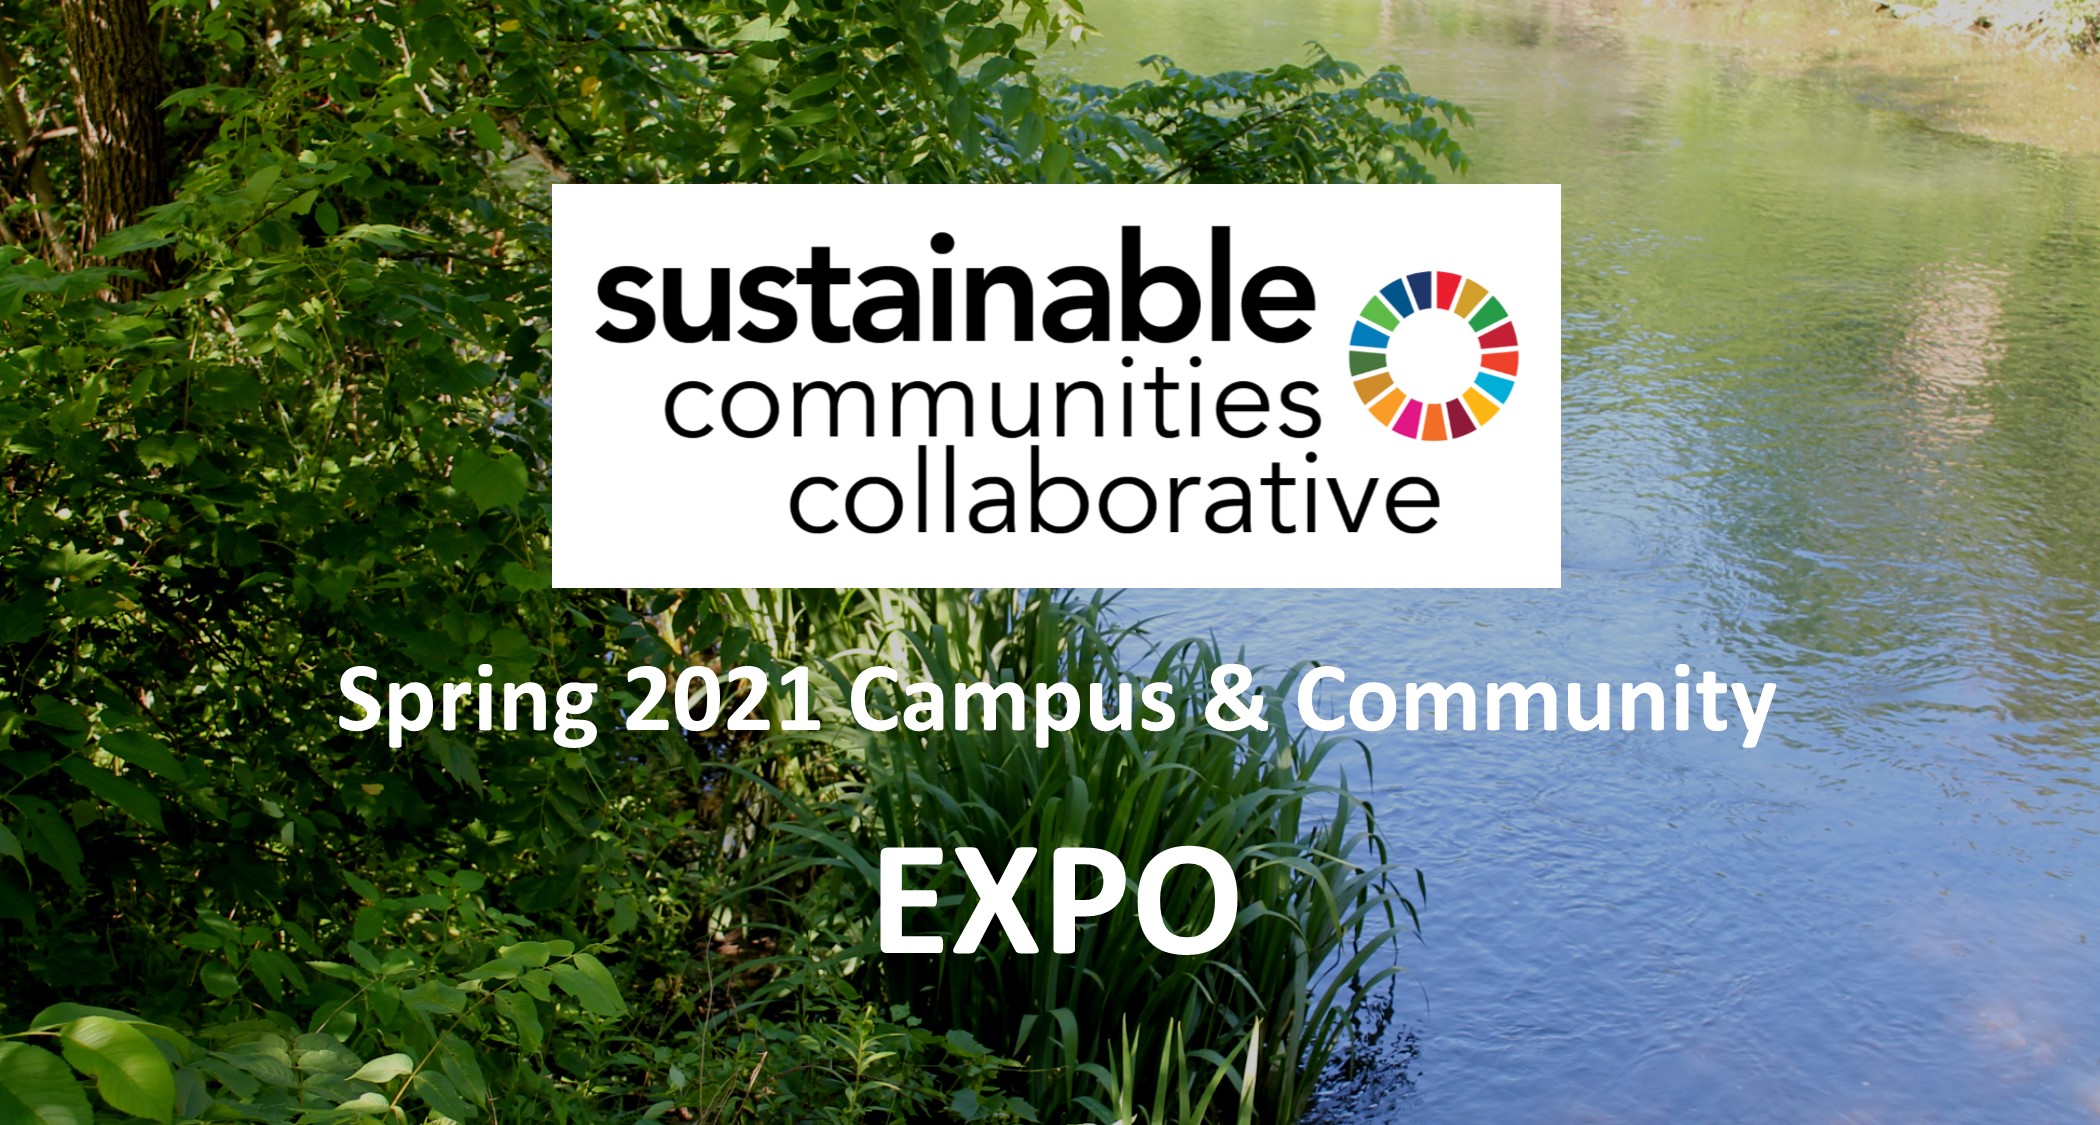 SCC Spring 2021 Expo Penn State Sustainability Institute